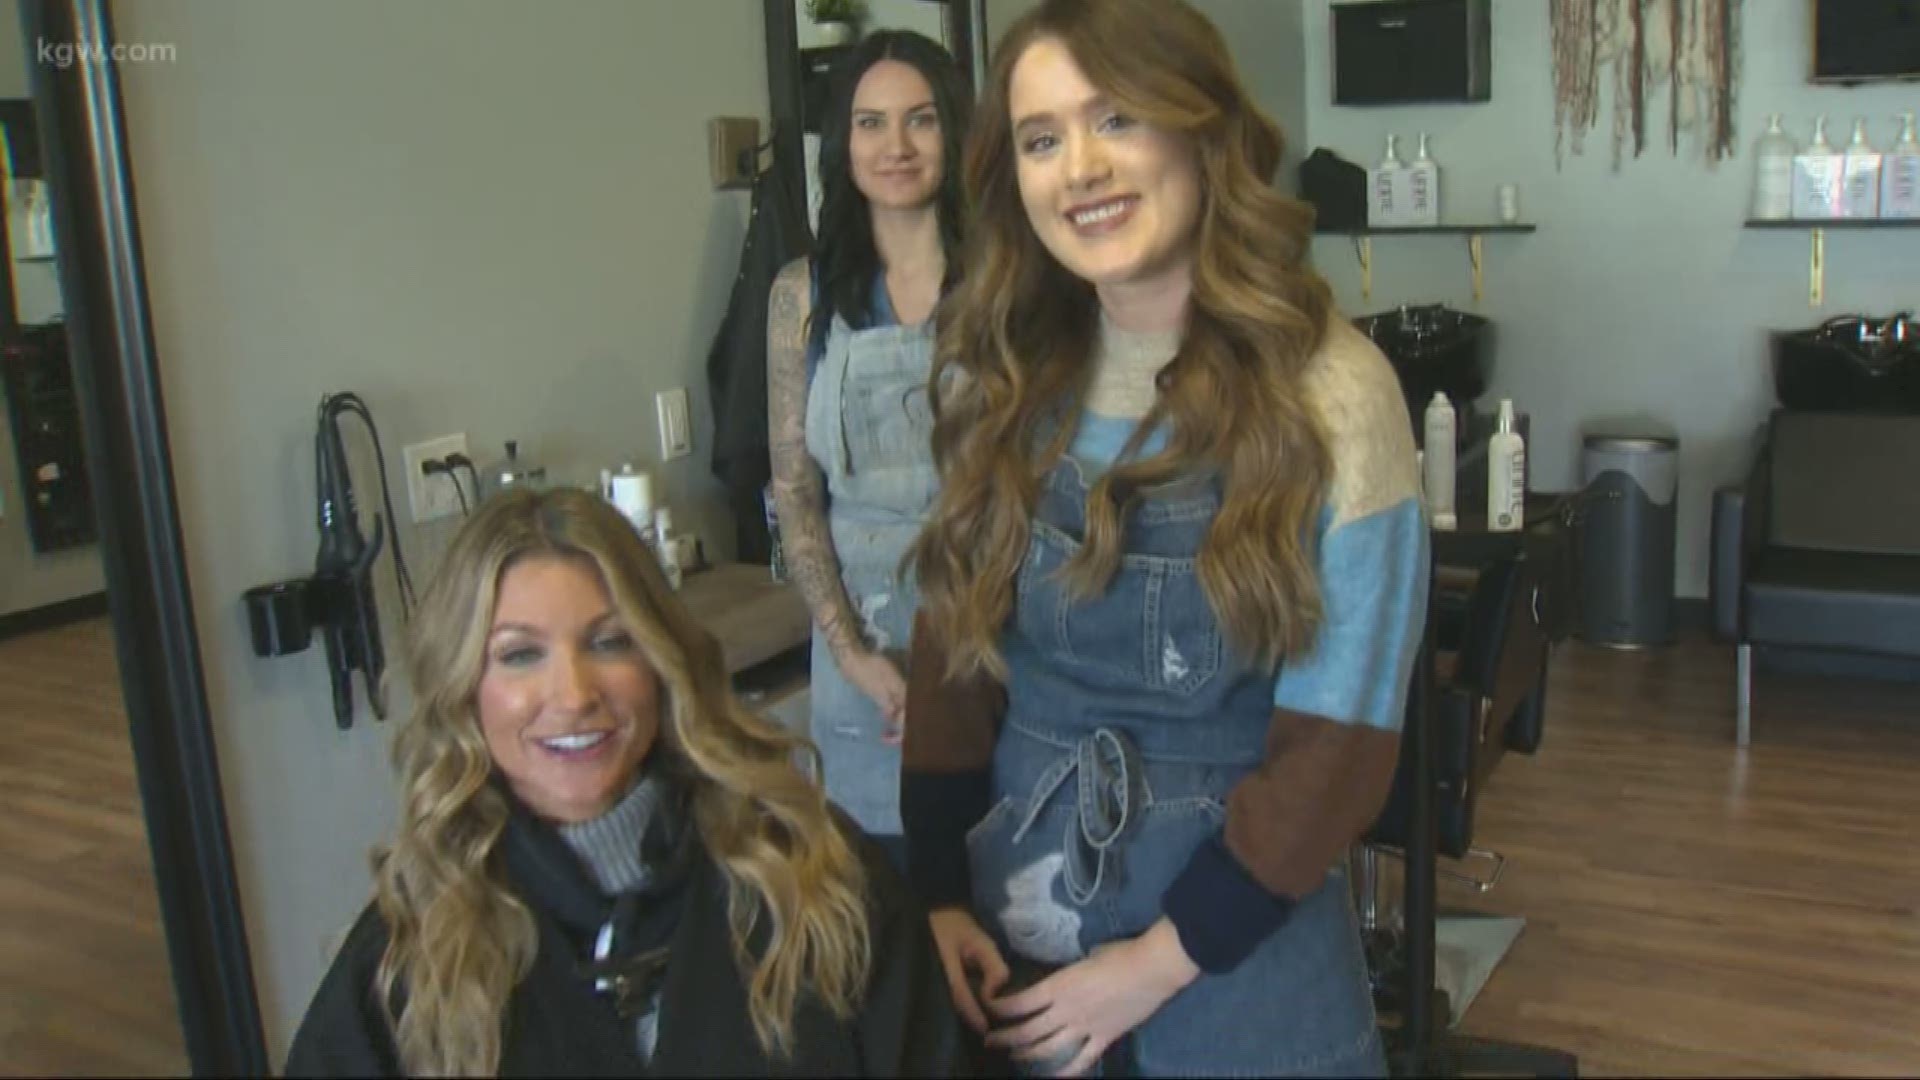 Mckinzie Roth talks with stylists about the hottest trends in fall hairstyles for women.

#TonightwithCassidy